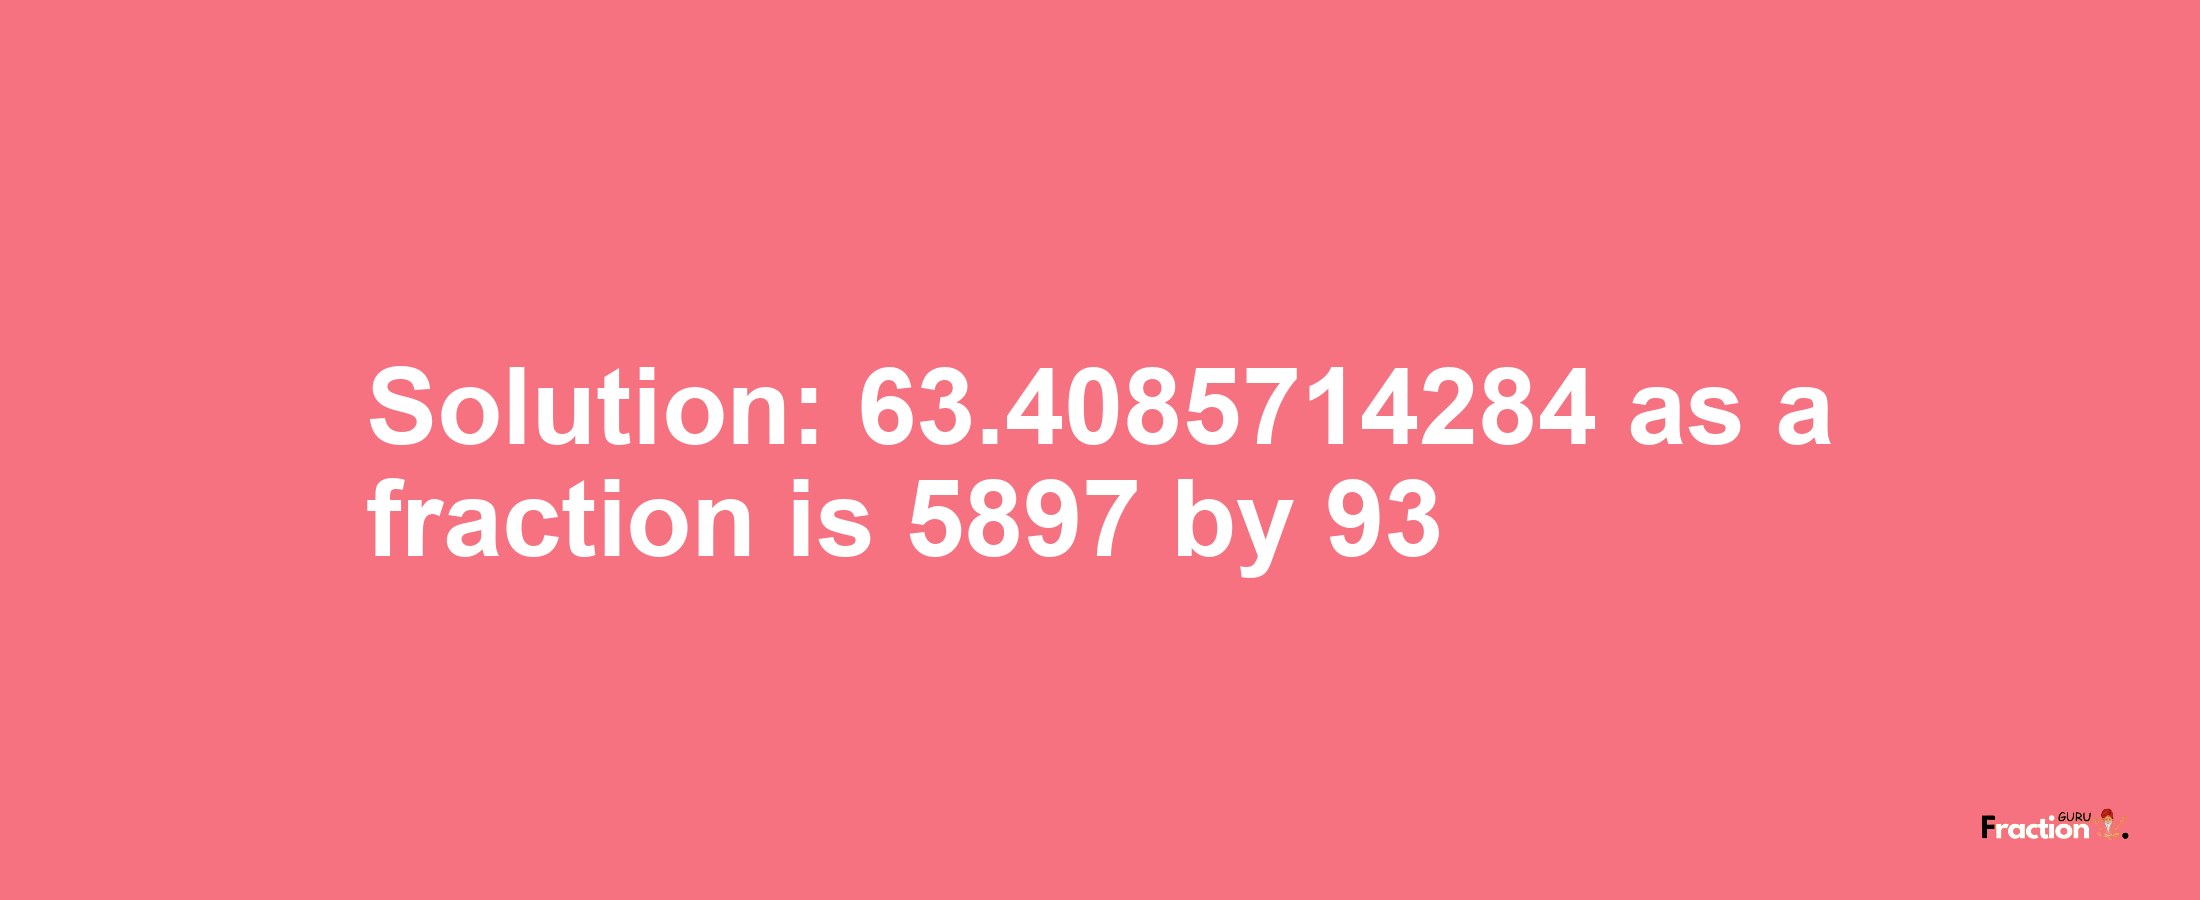 Solution:63.4085714284 as a fraction is 5897/93